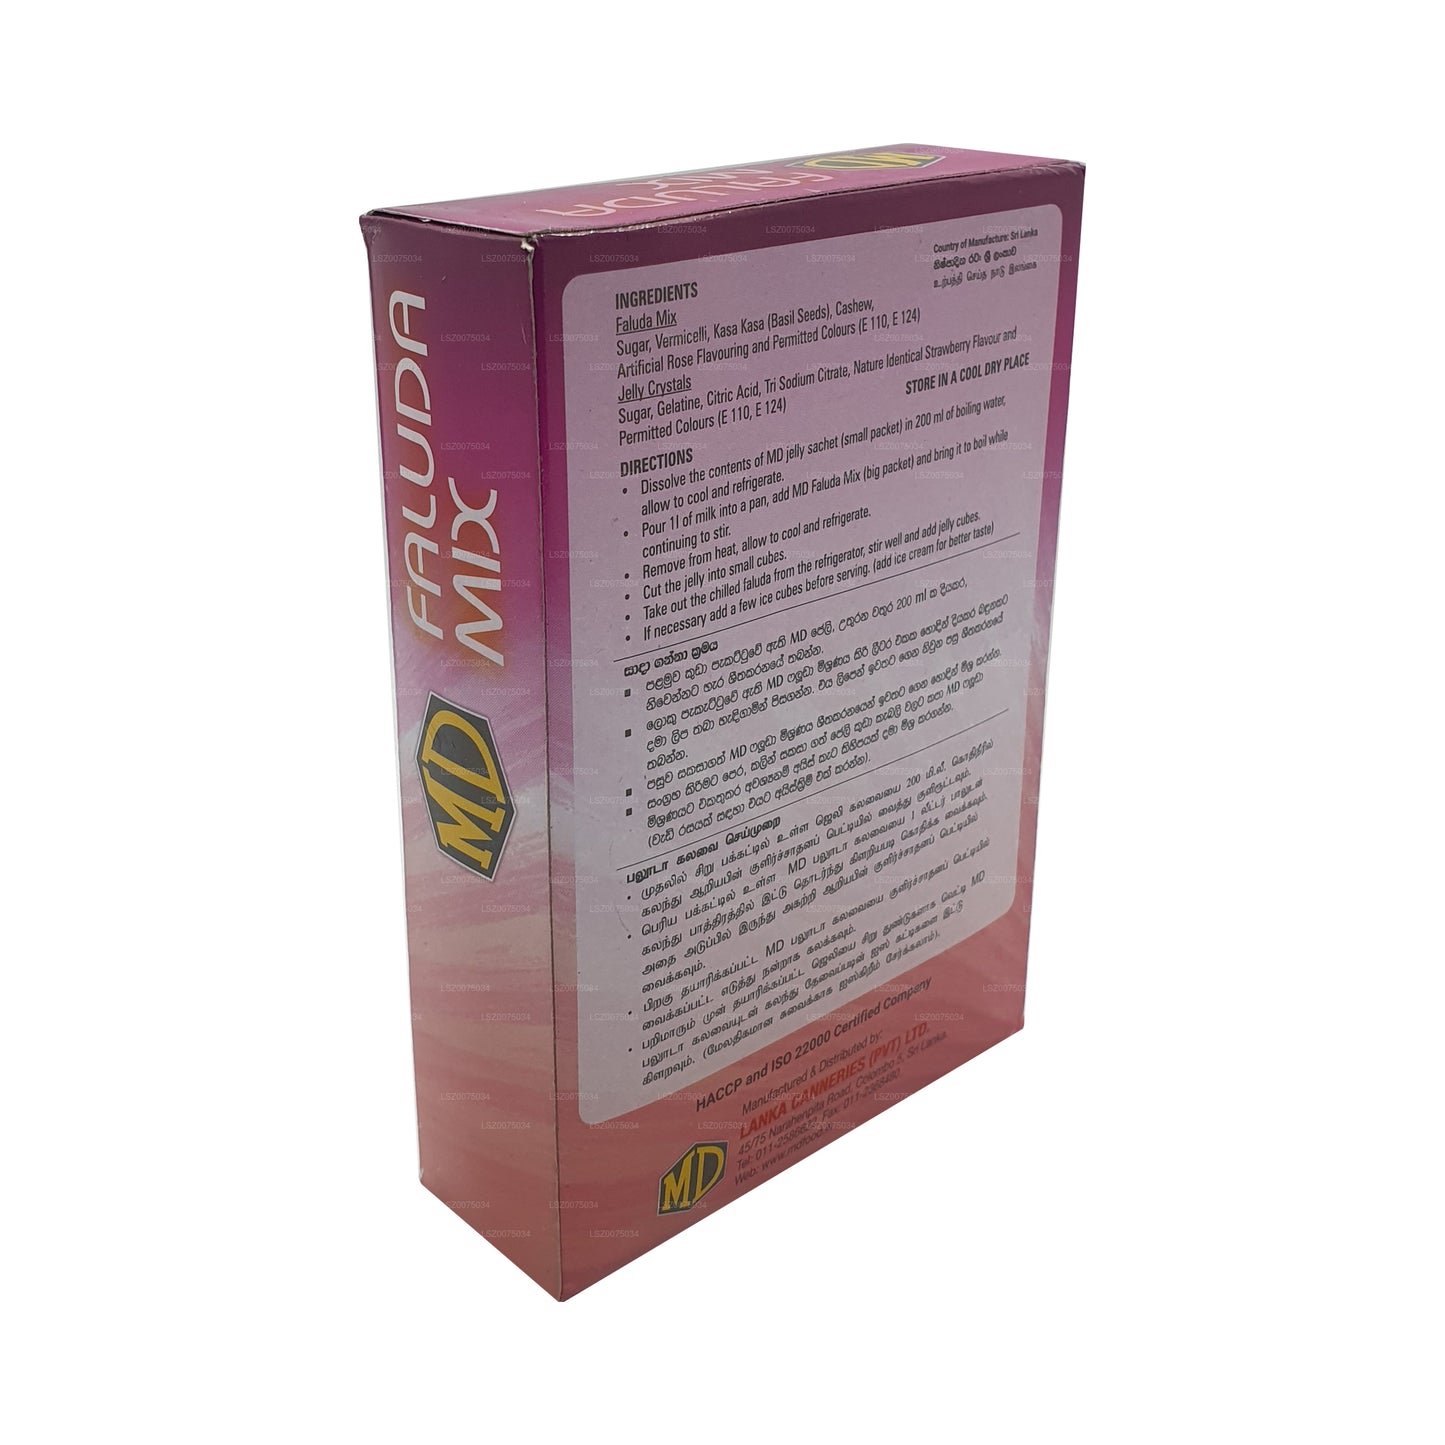 MD Instant Faluda Mix (250g)